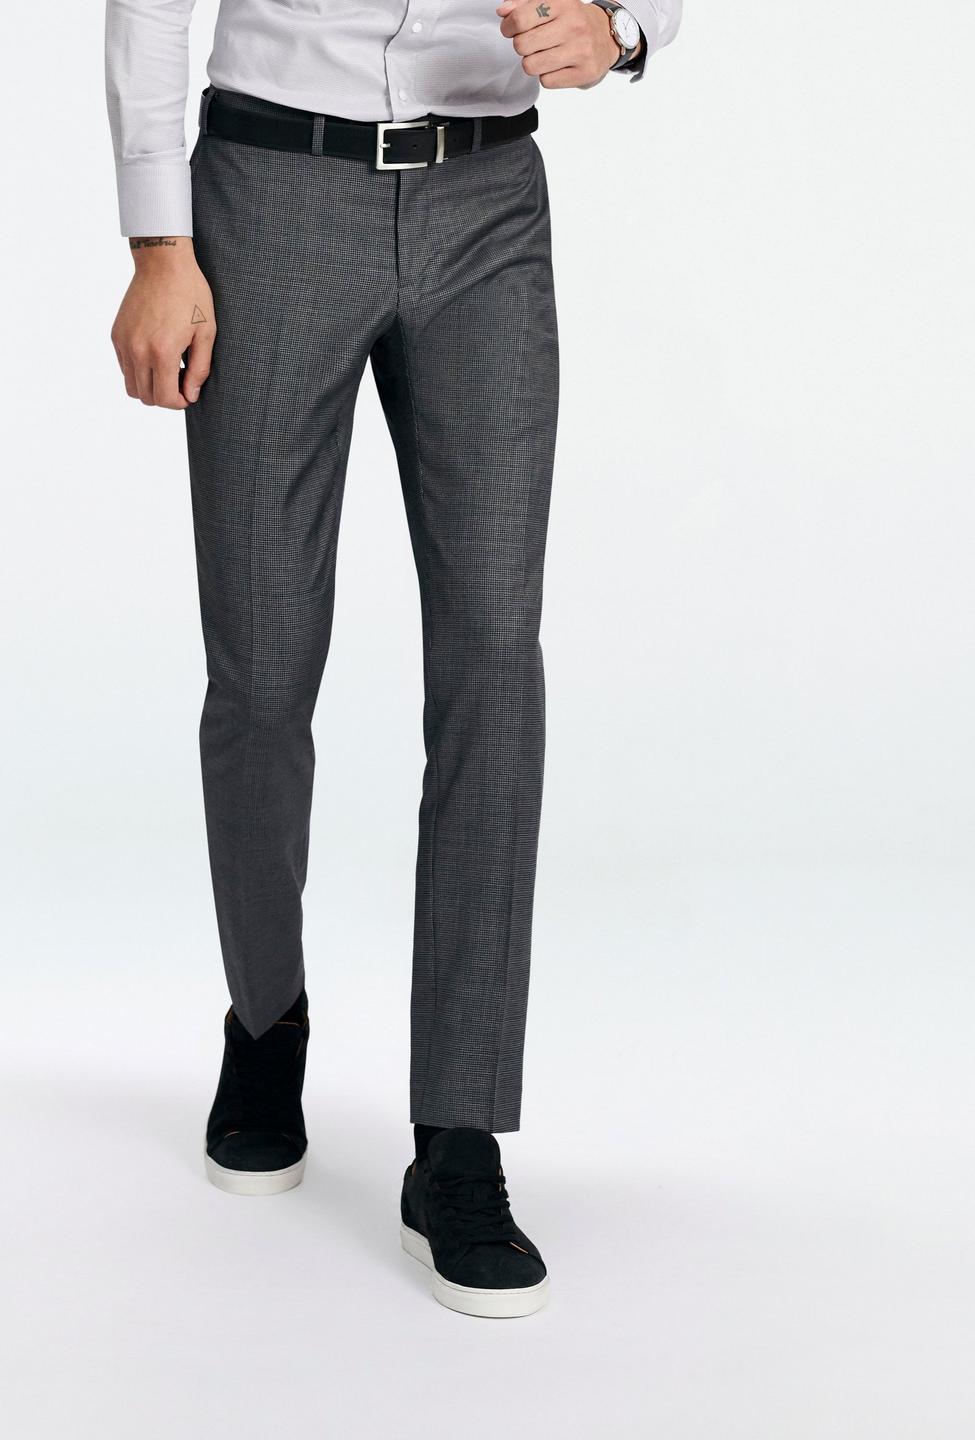 Gray pants - Malvern Houndstooth Design from Seasonal Indochino Collection